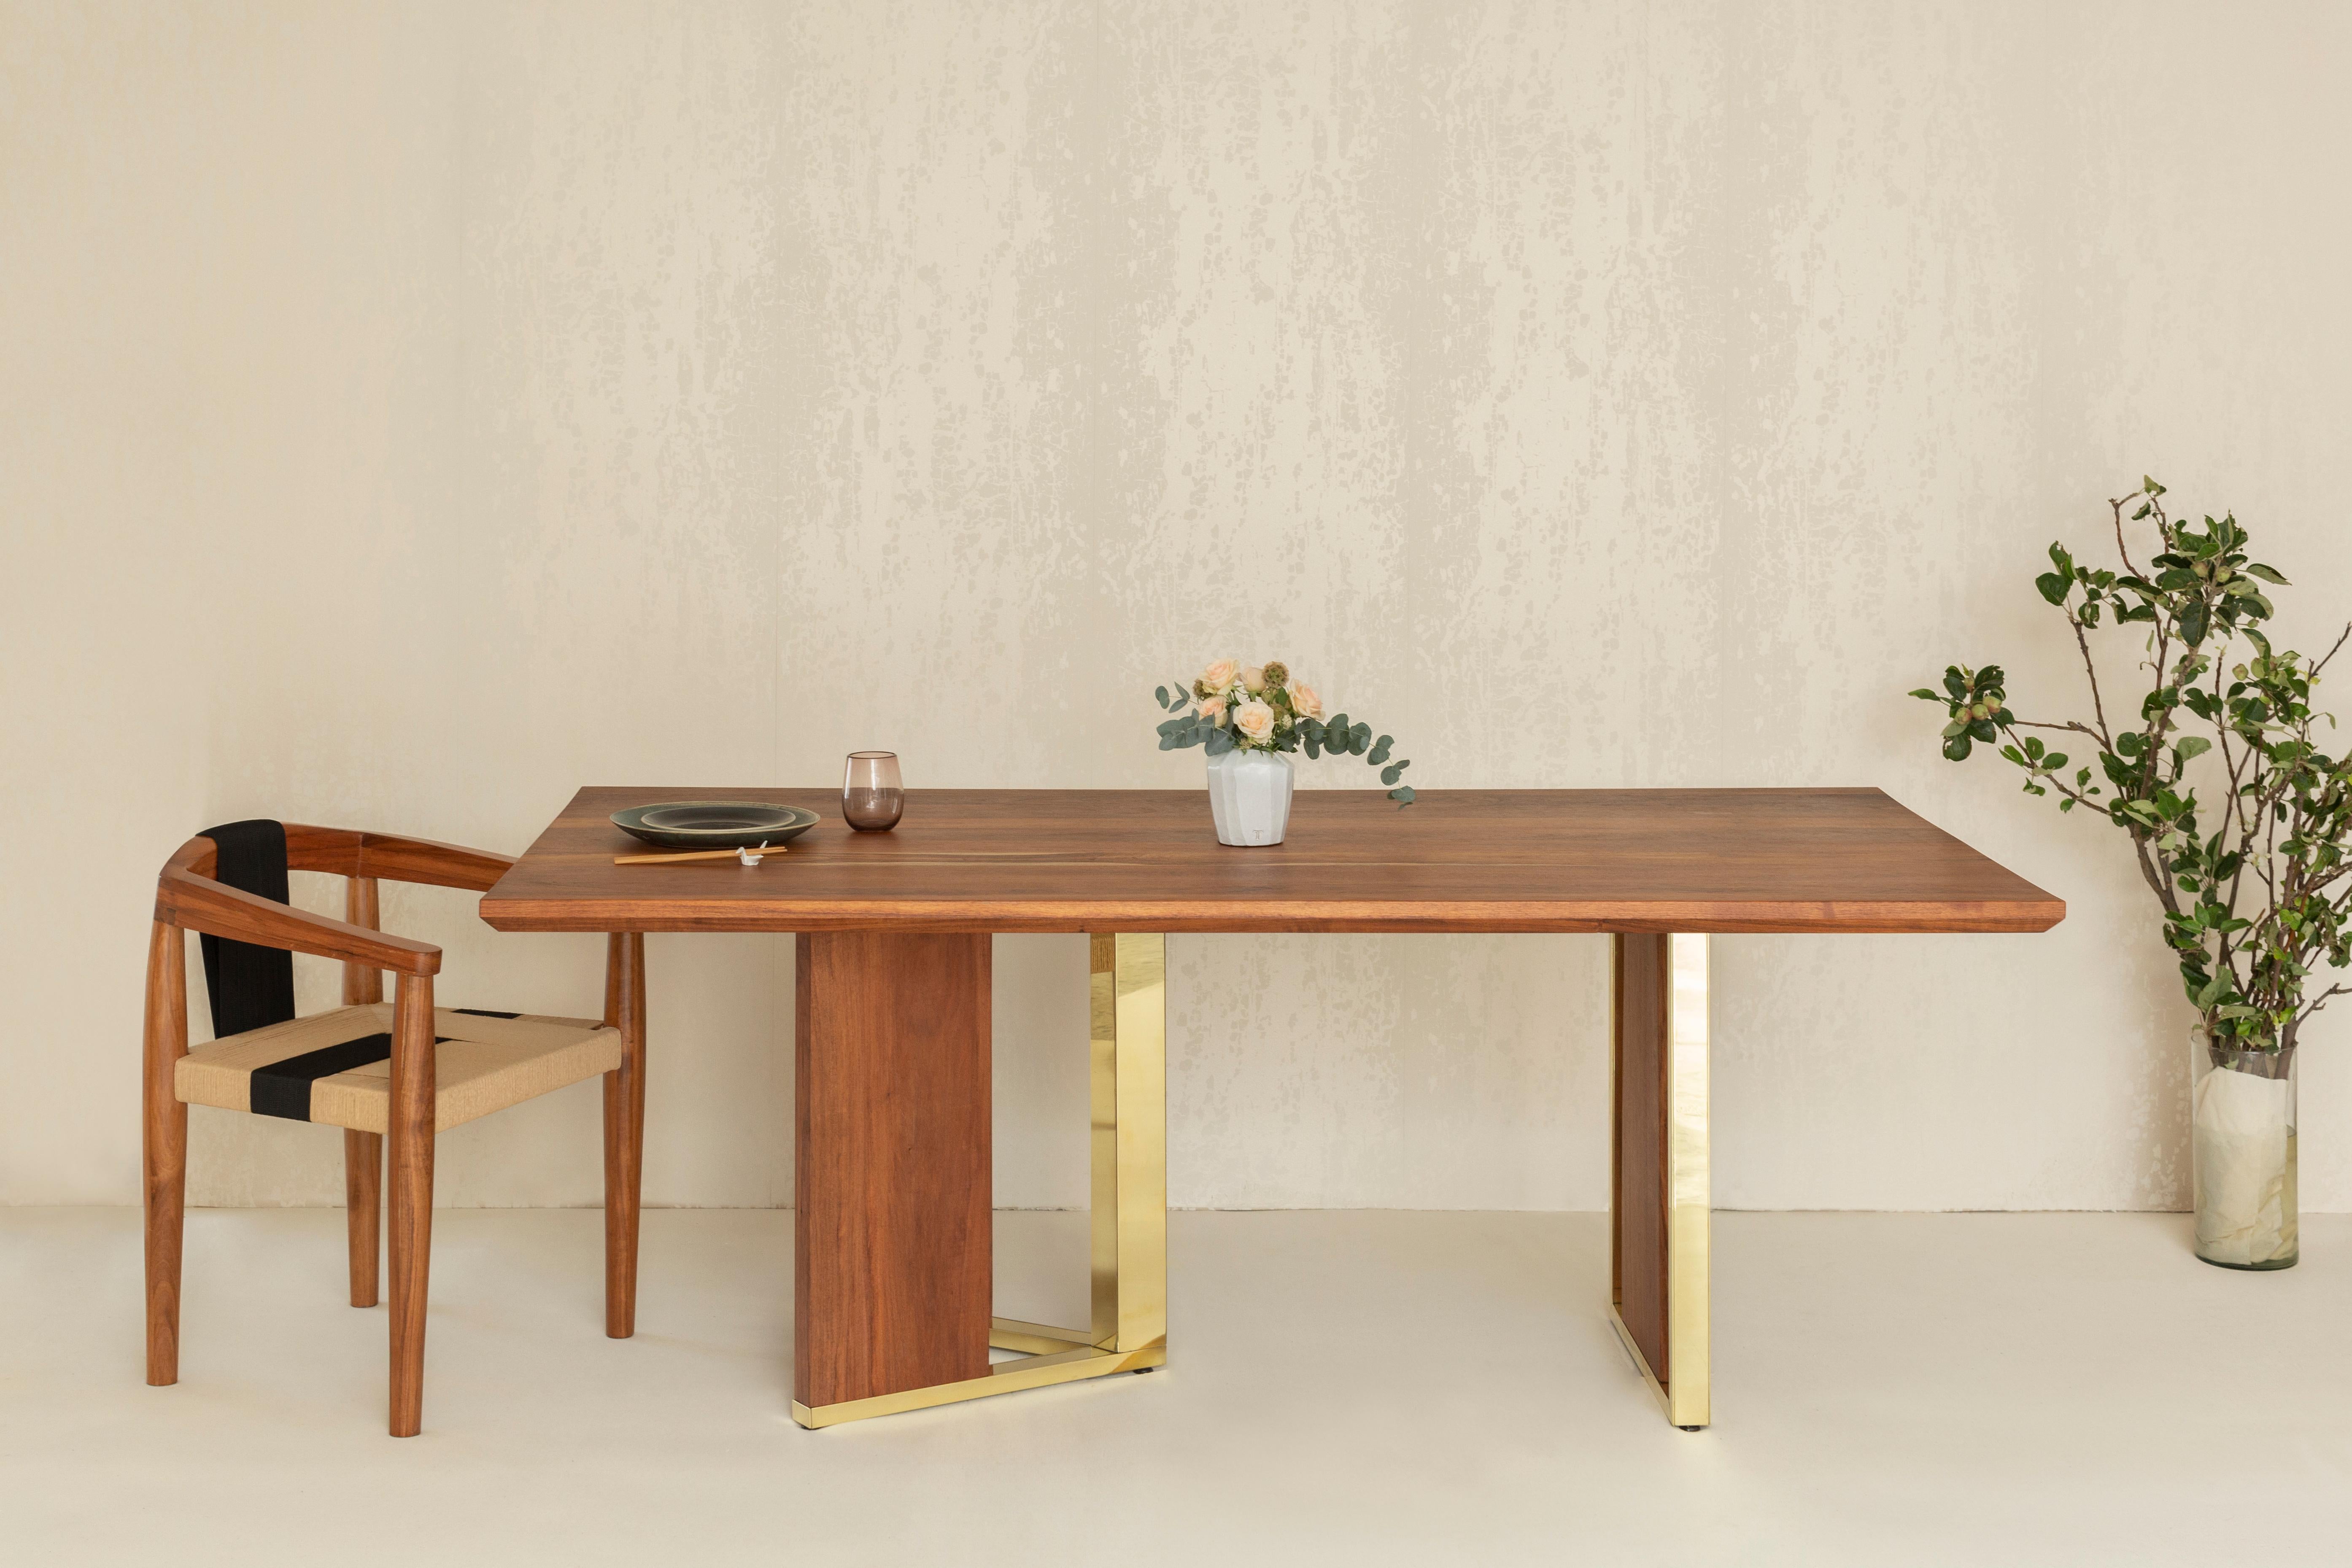 The Pollan table is a made out of a Mexican wood calles Tzalam. It serves as a dining table or can be used as a desk. The legs are a unique combination of brass and wood.